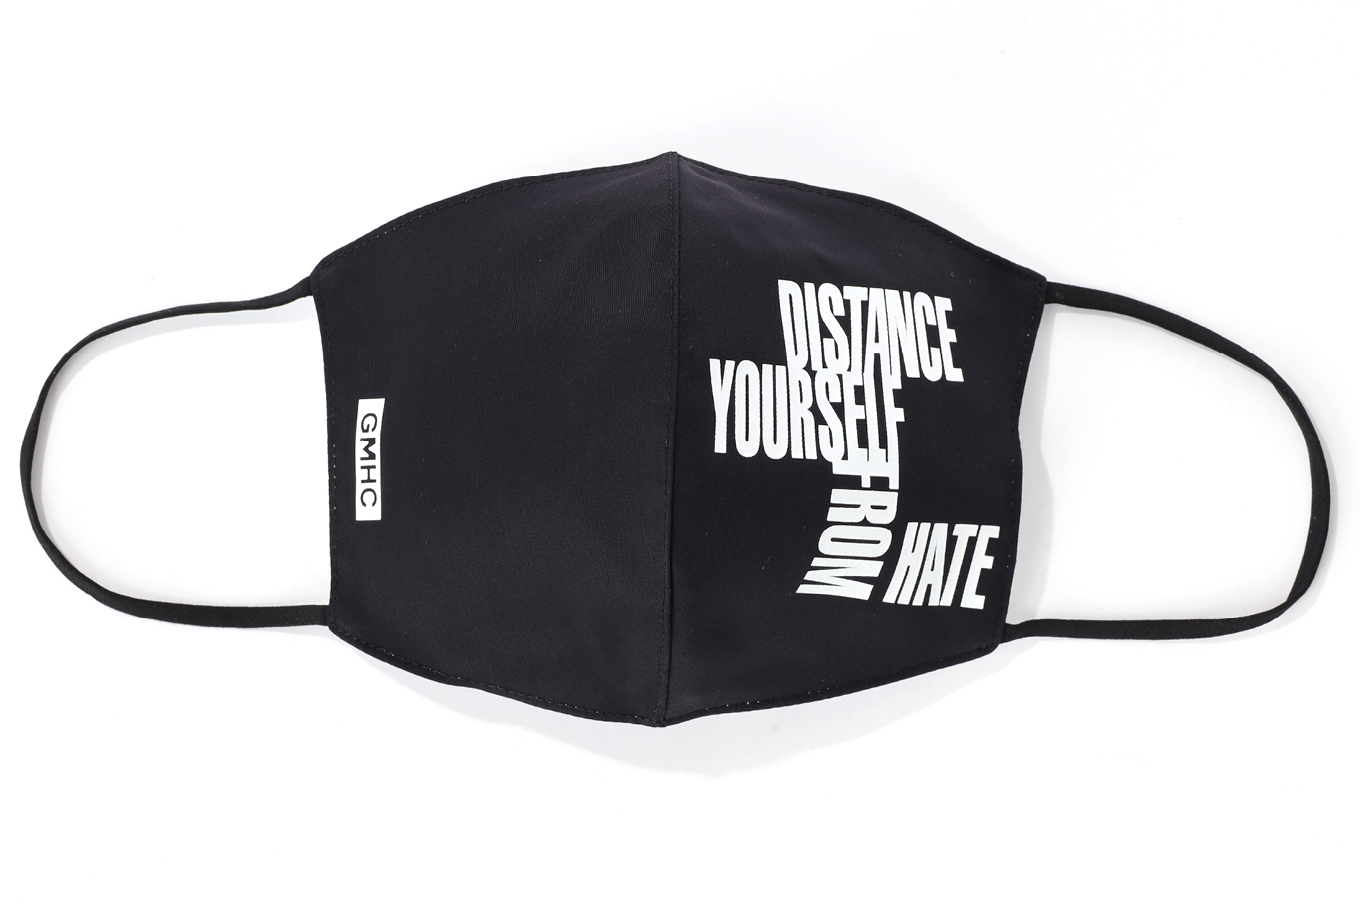 GMHC mask that says "distance yourself from hate"